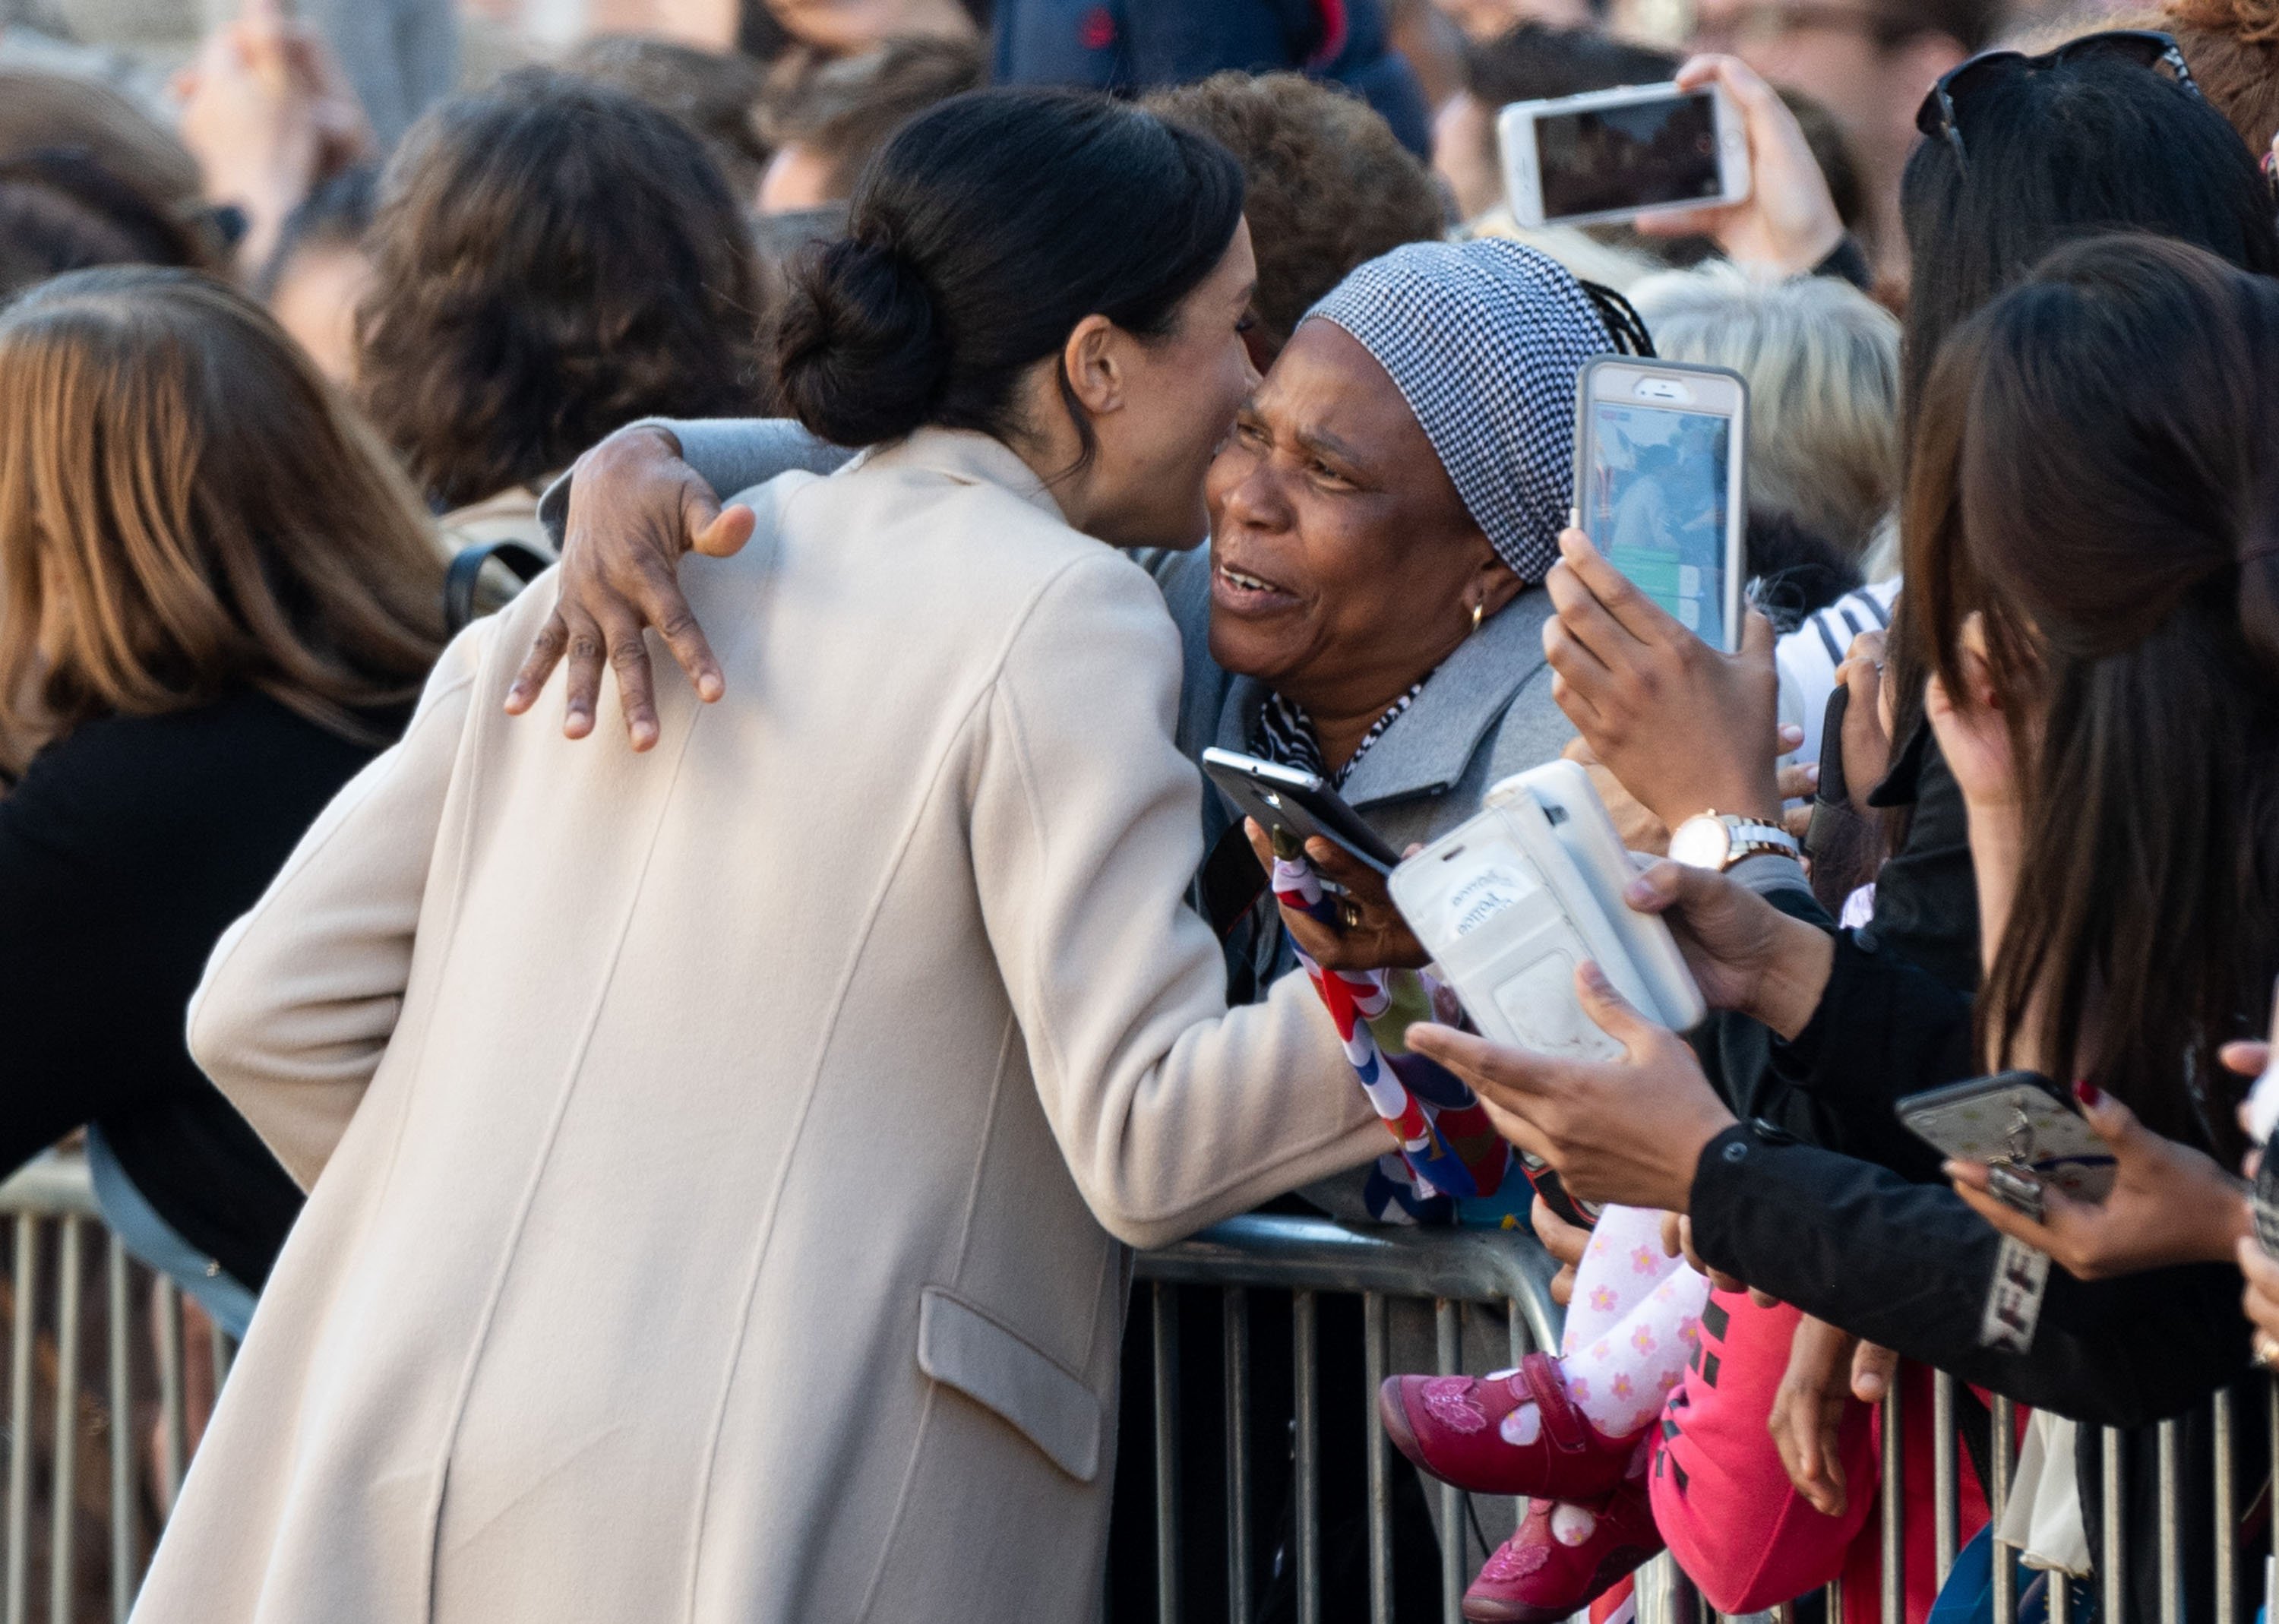 Meghan, Duchess of Sussex gets a hug from a member of the public during a visit to Edes House during an official visit to Sussex on October 3, 2018 | Source: Getty Images